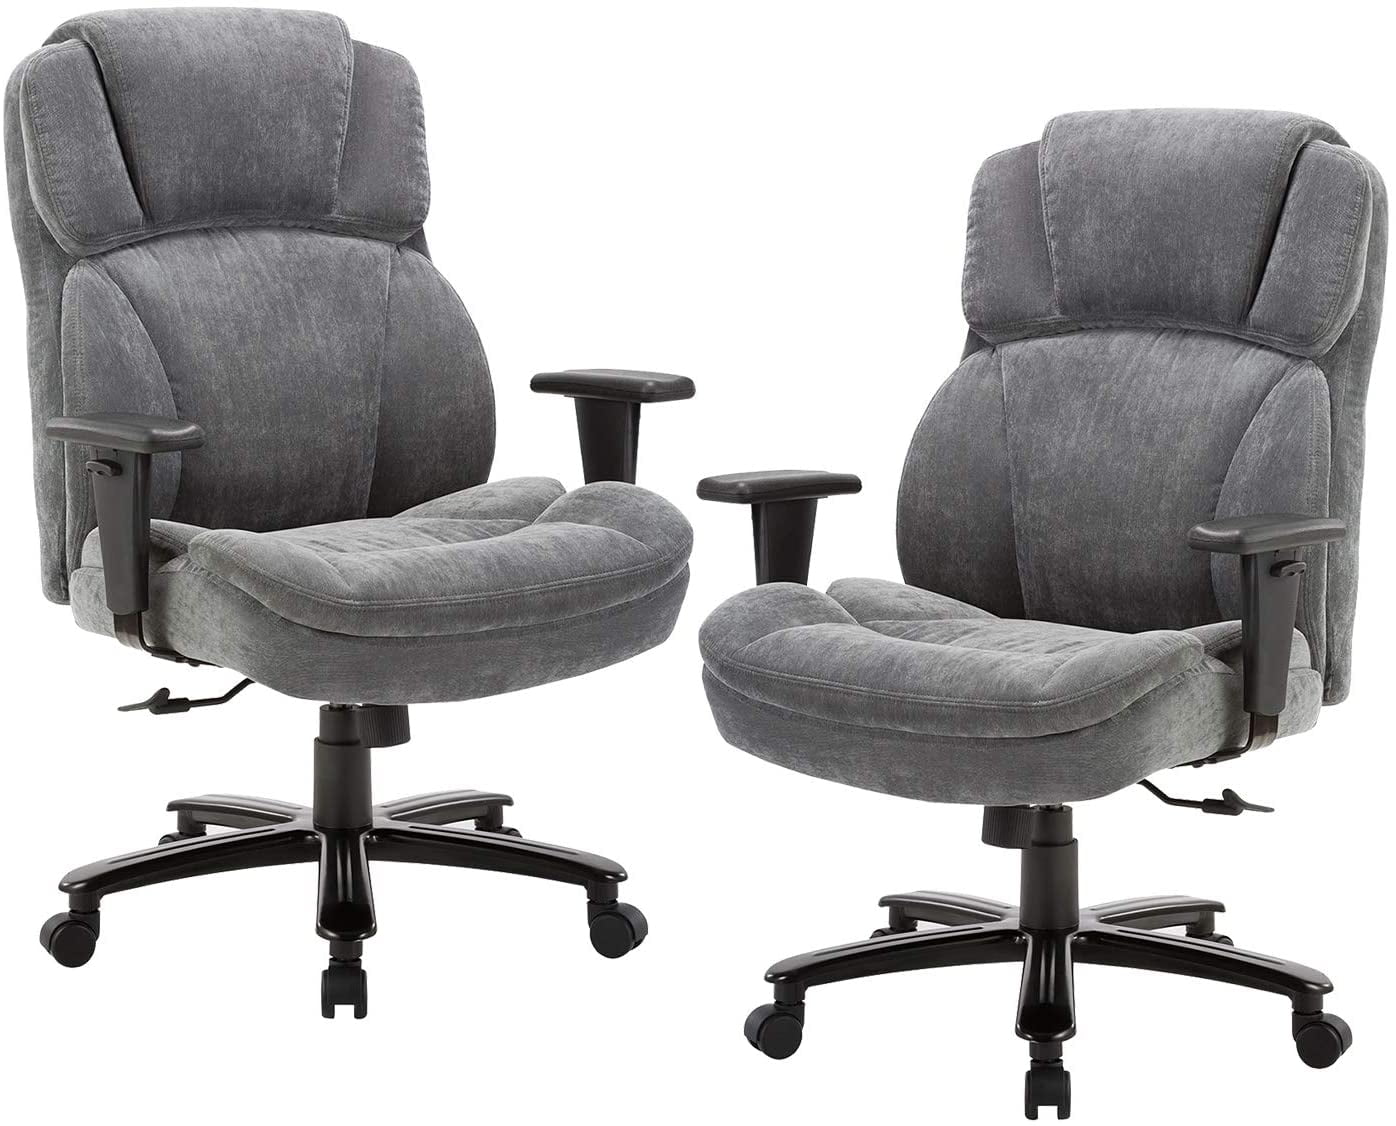 CLATINA Ergonomic Big & Tall Executive Office Chair with Fabric Upholstery 400lb 